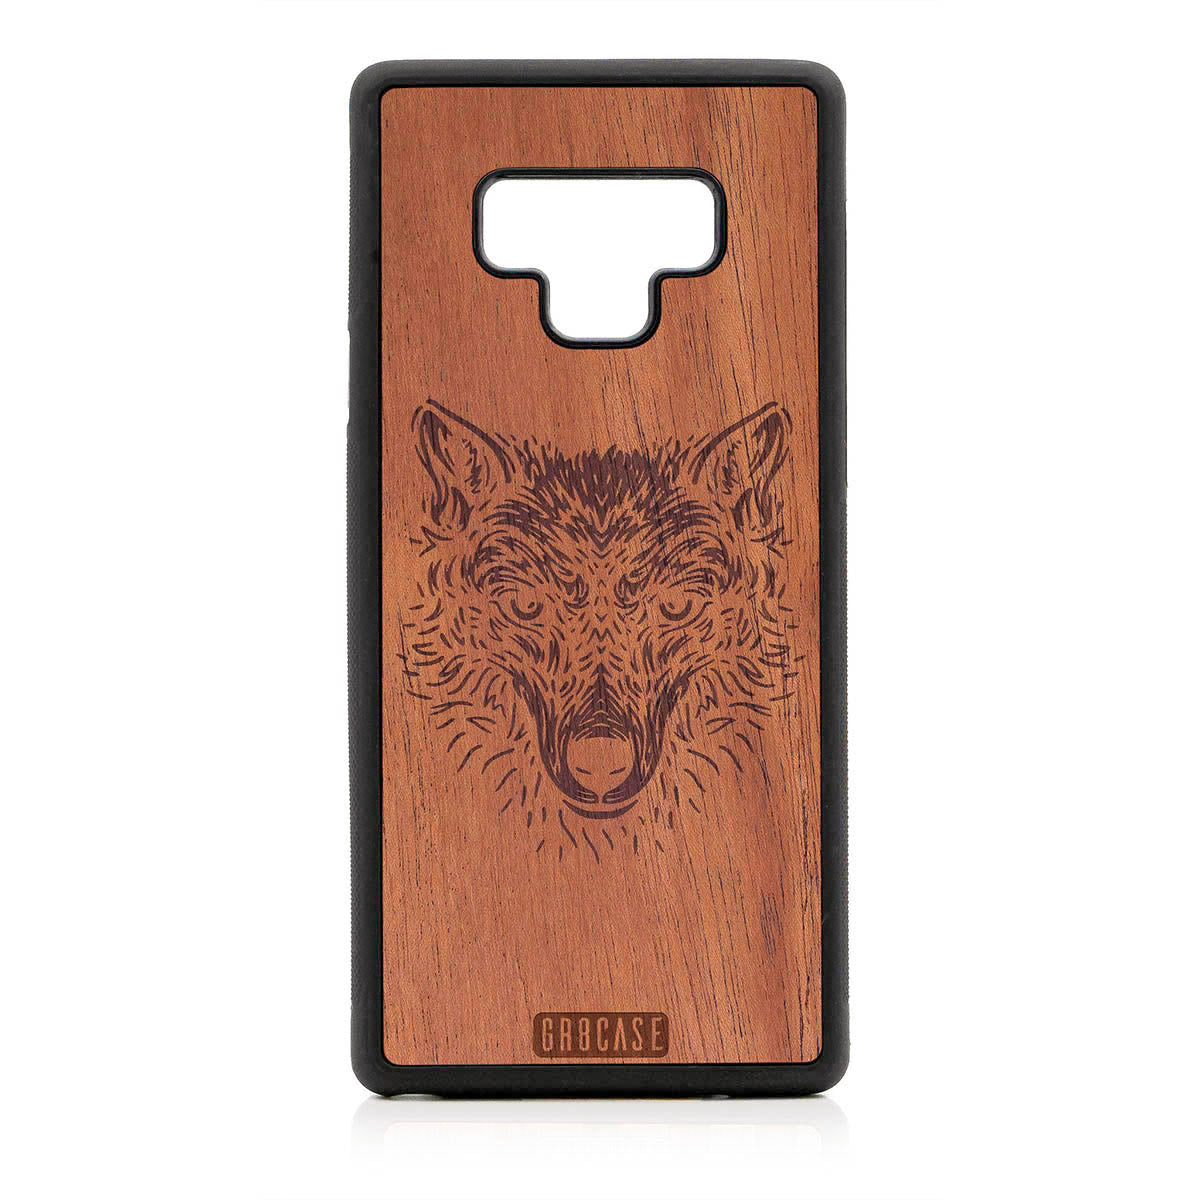 Furry Wolf Design Wood Case For Samsung Galaxy Note 9